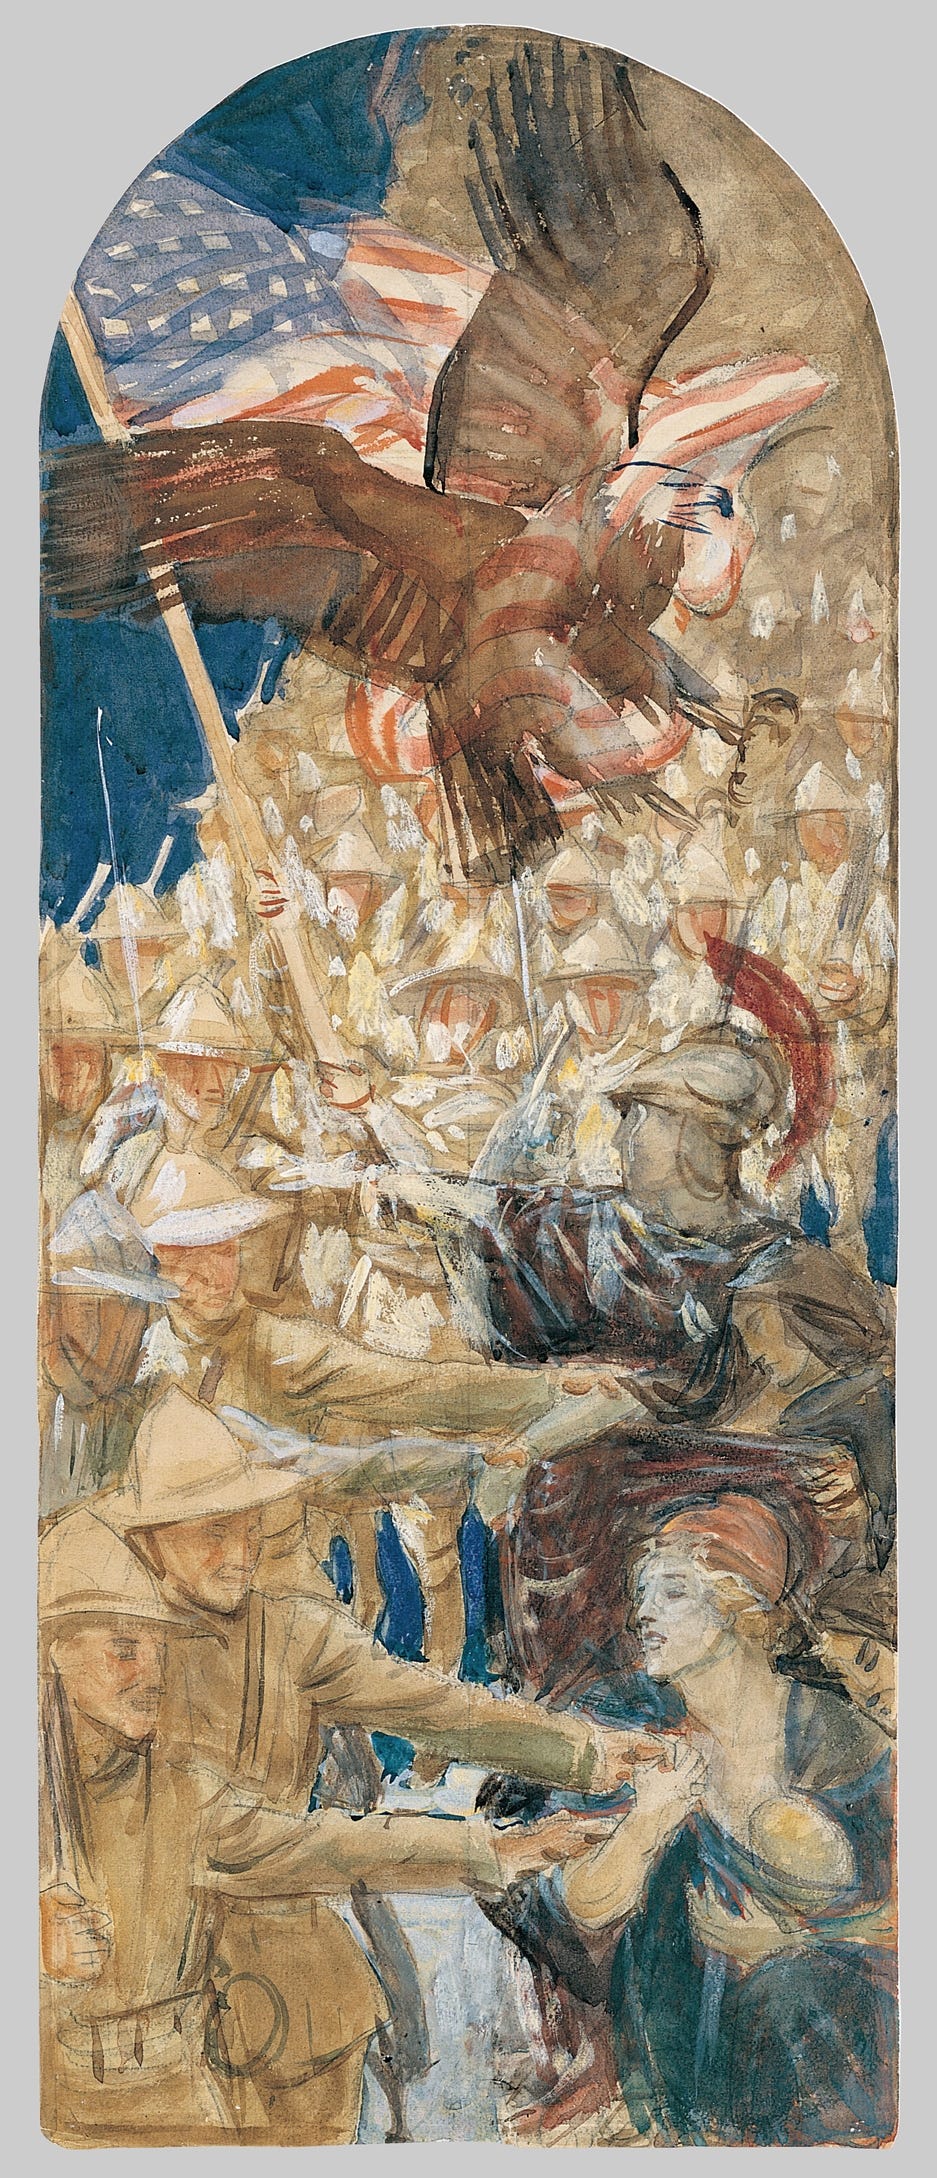 Study for ‘The Coming of the Americans’ (between 1921 and 1922)